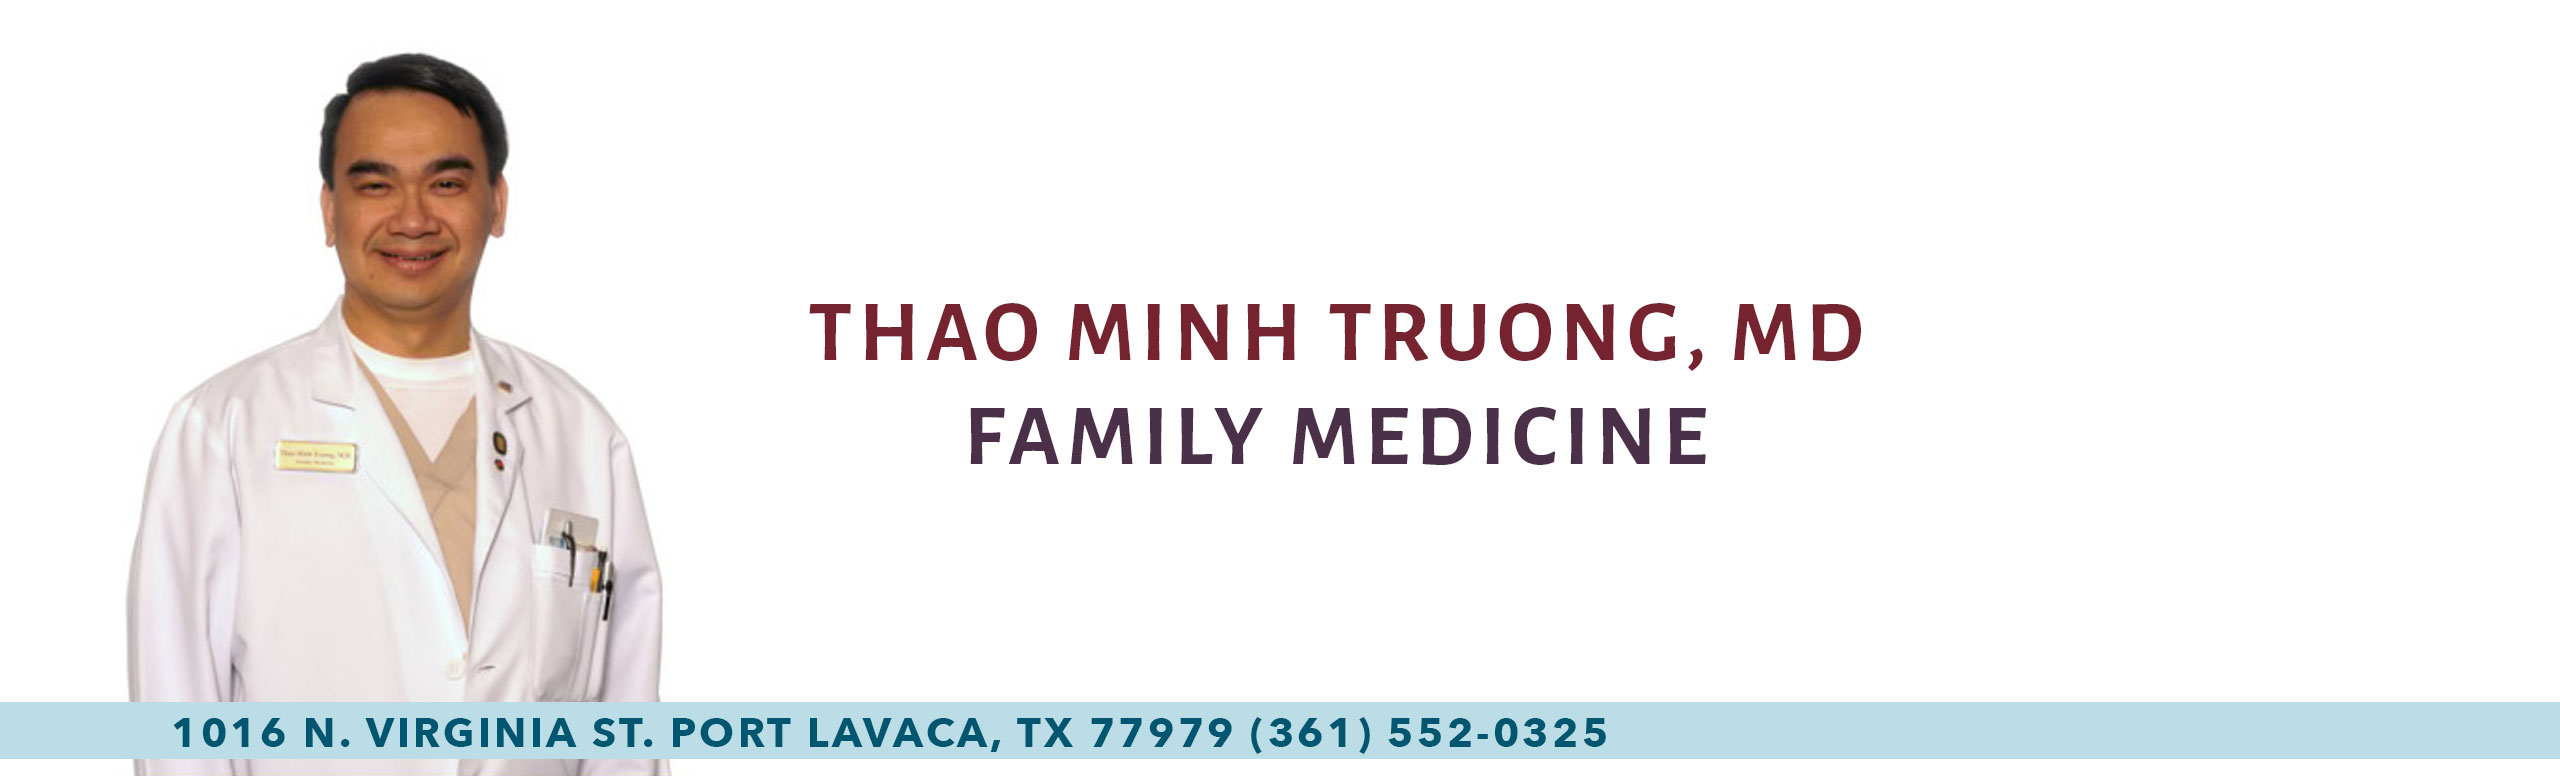 Thao Minh Truong, MD
Family Medicine